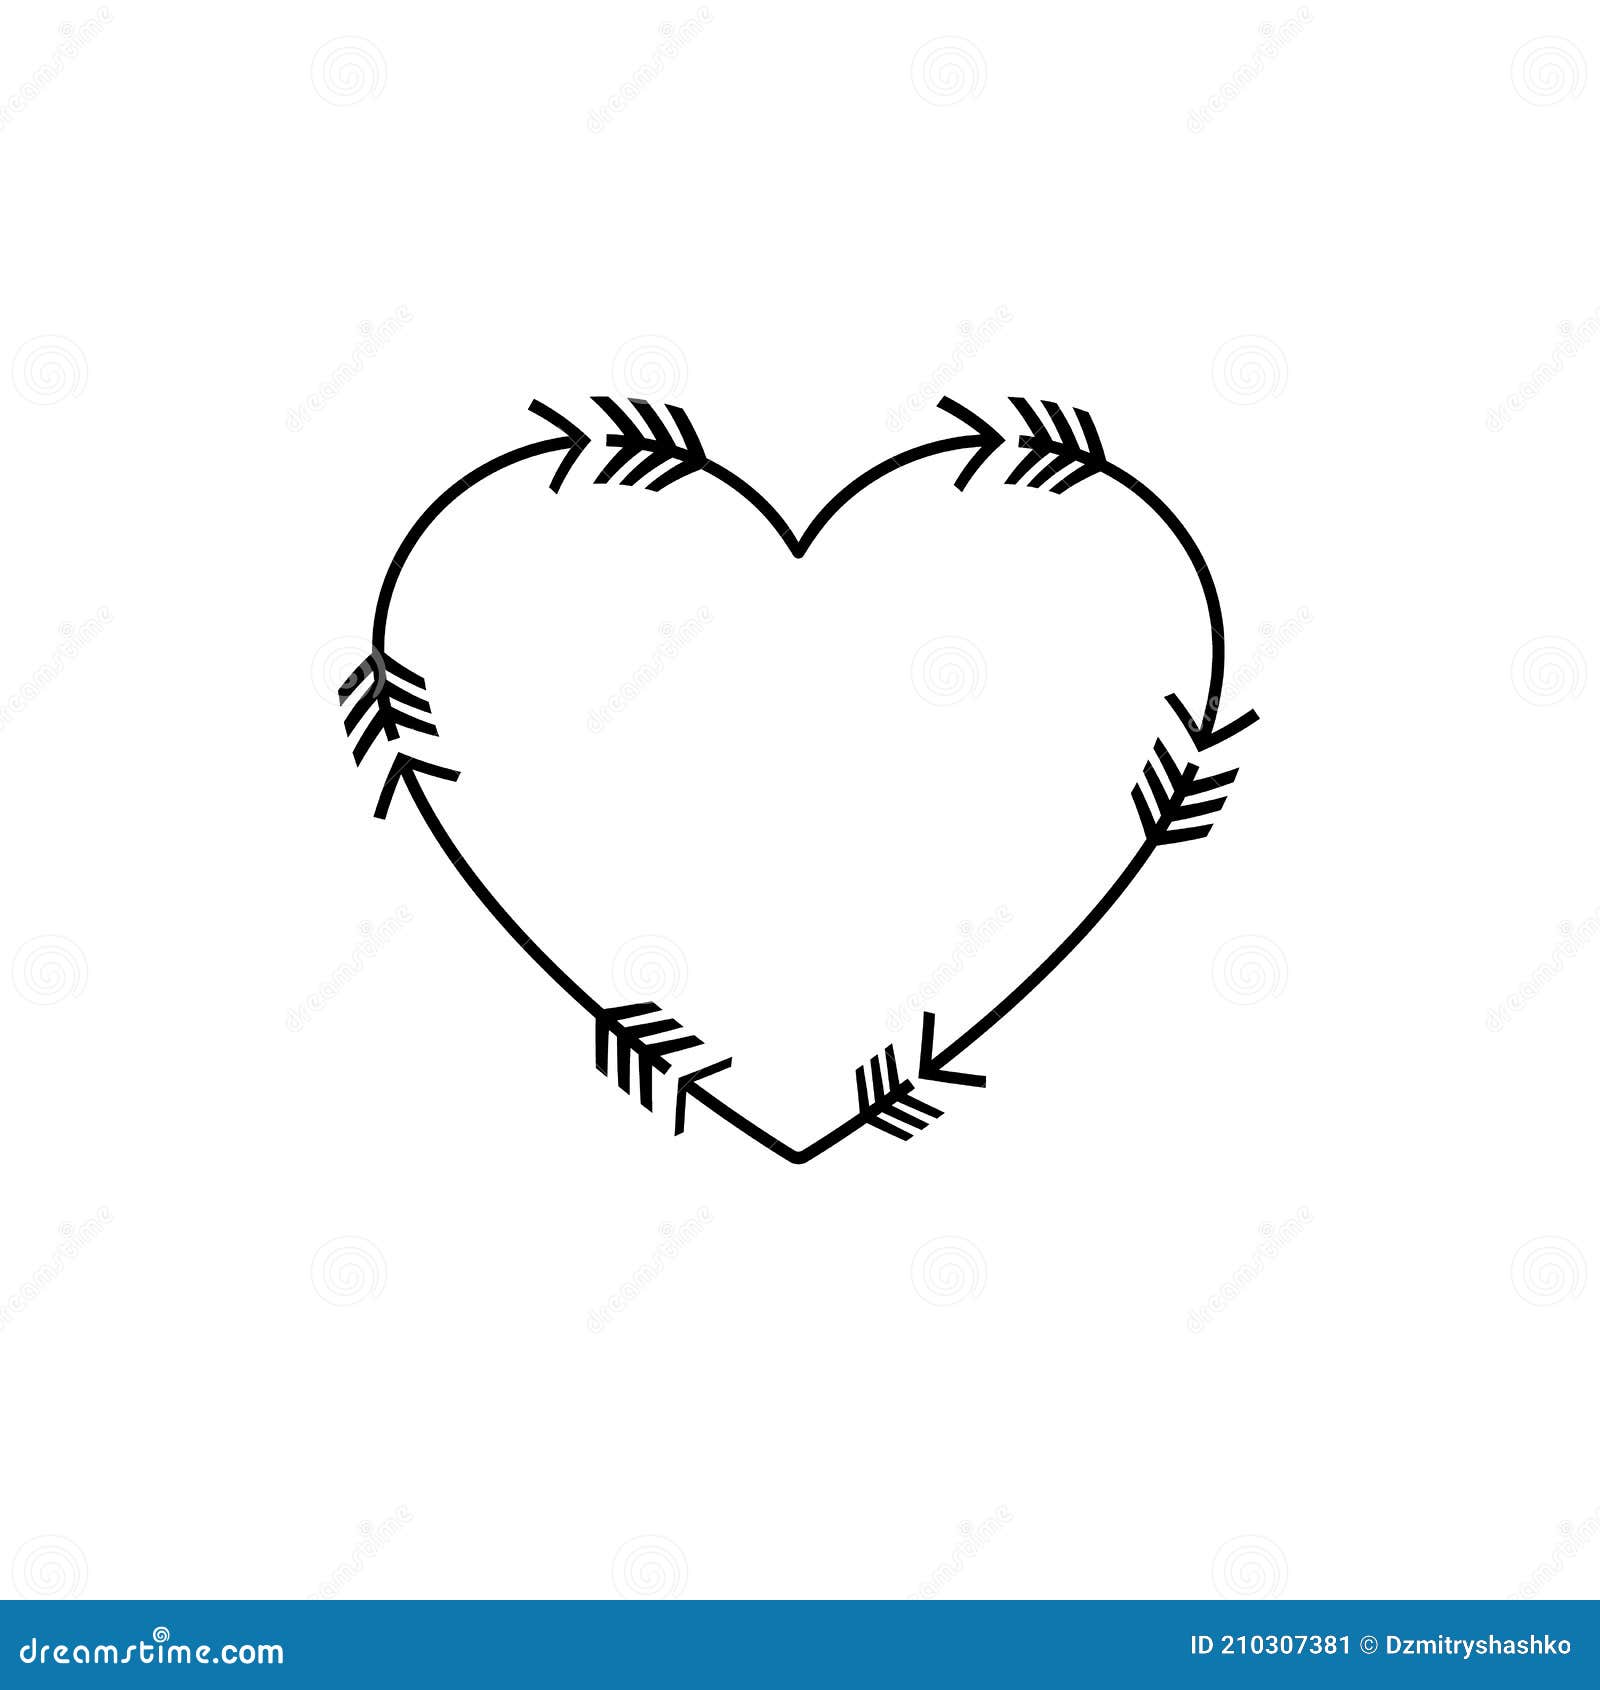 Tribal Arrows Heart Icon. Clipart Image Stock Vector - Illustration of ...